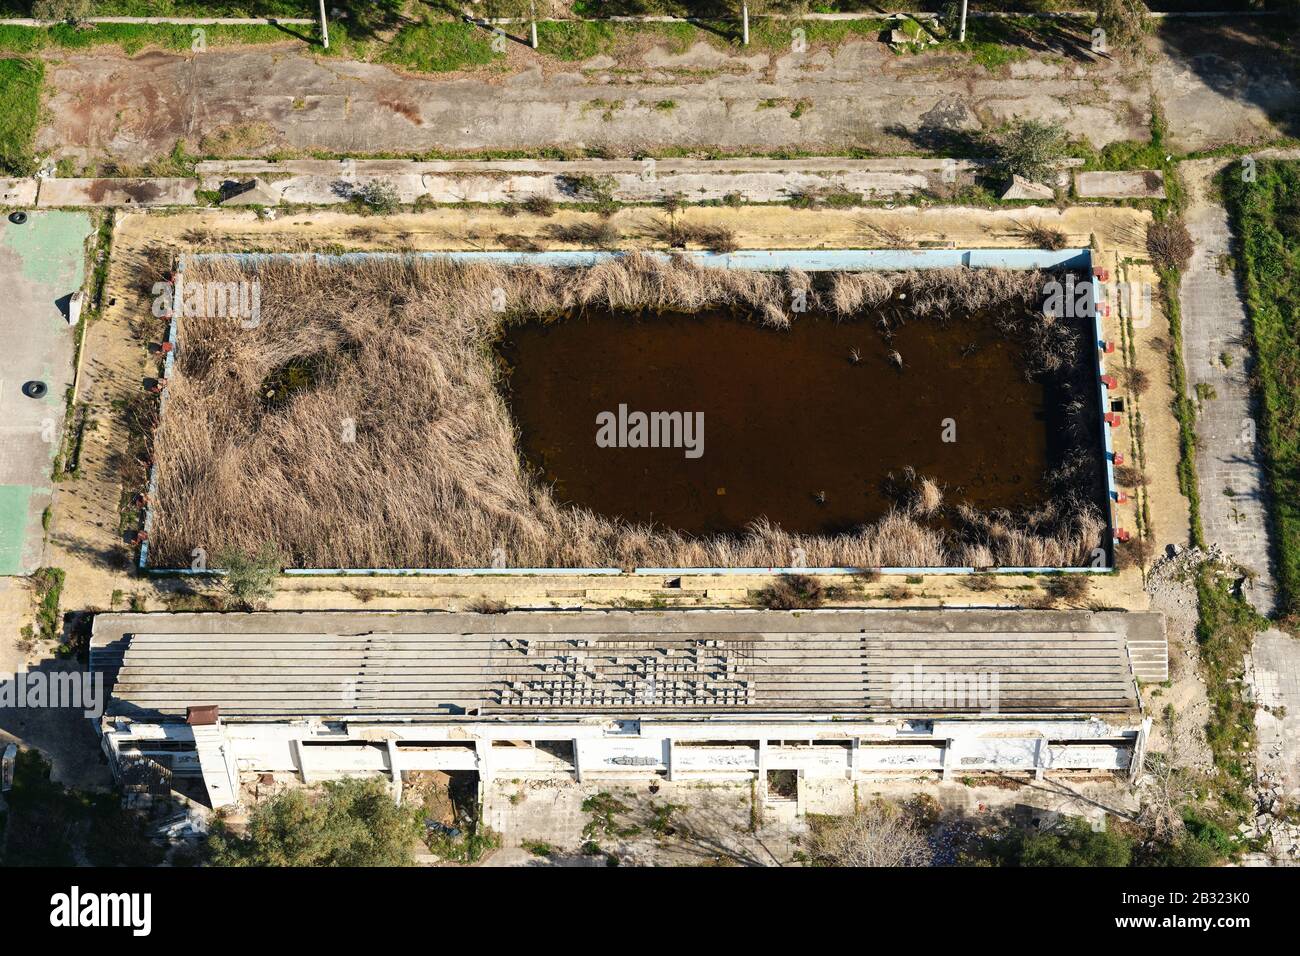 AERIAL VIEW. Abandoned olympic-size swimming pool reclaimed by vegetation. Patras, West Greece, Peloponnese Peninsula, Greece. Stock Photo